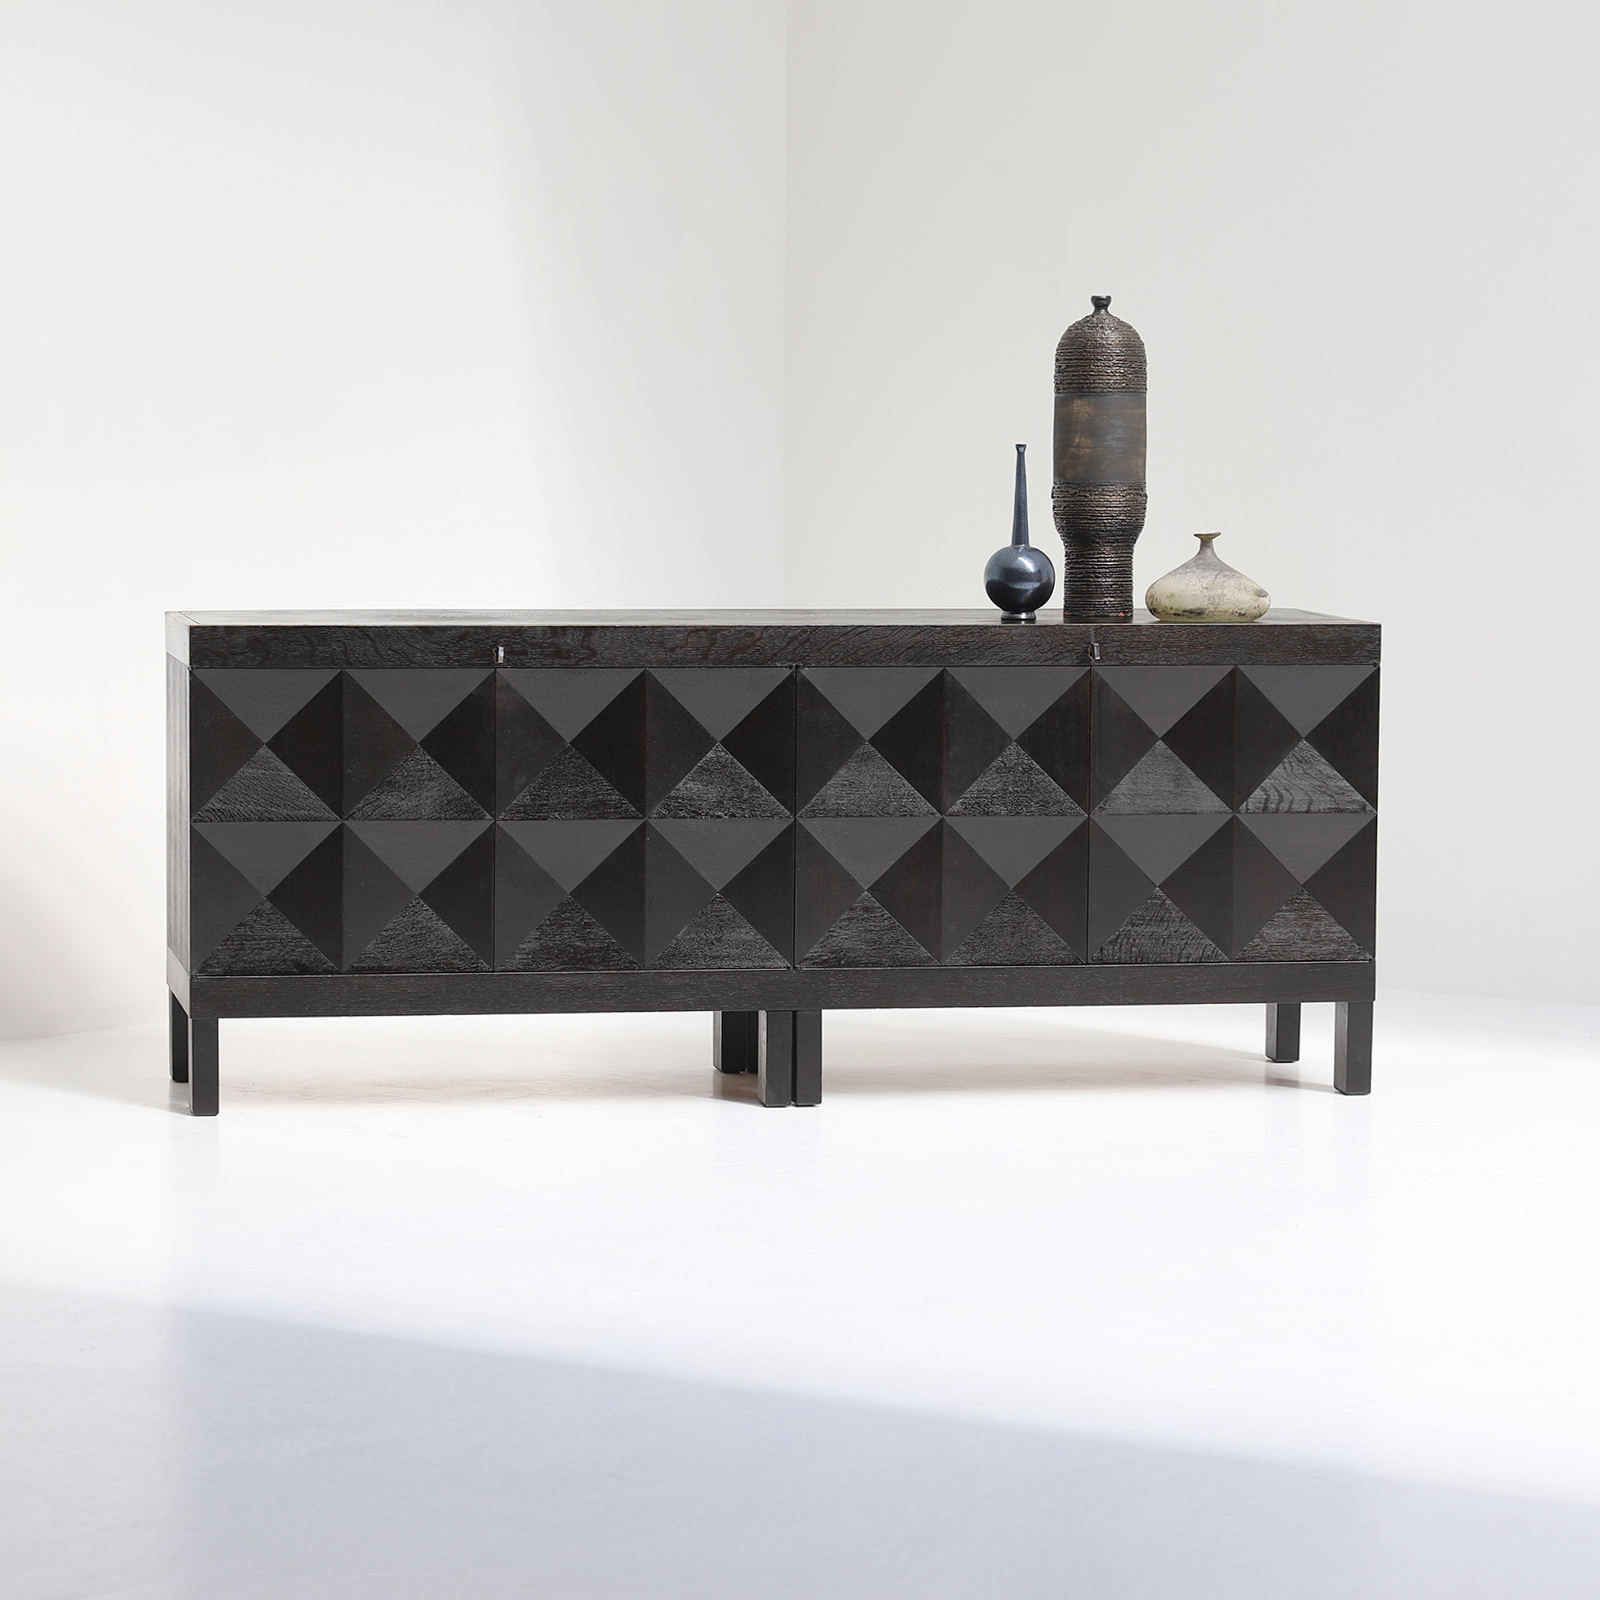 quality crafted sideboard with op-art doors designed by J. Batenburg for MI, Belgium 1969